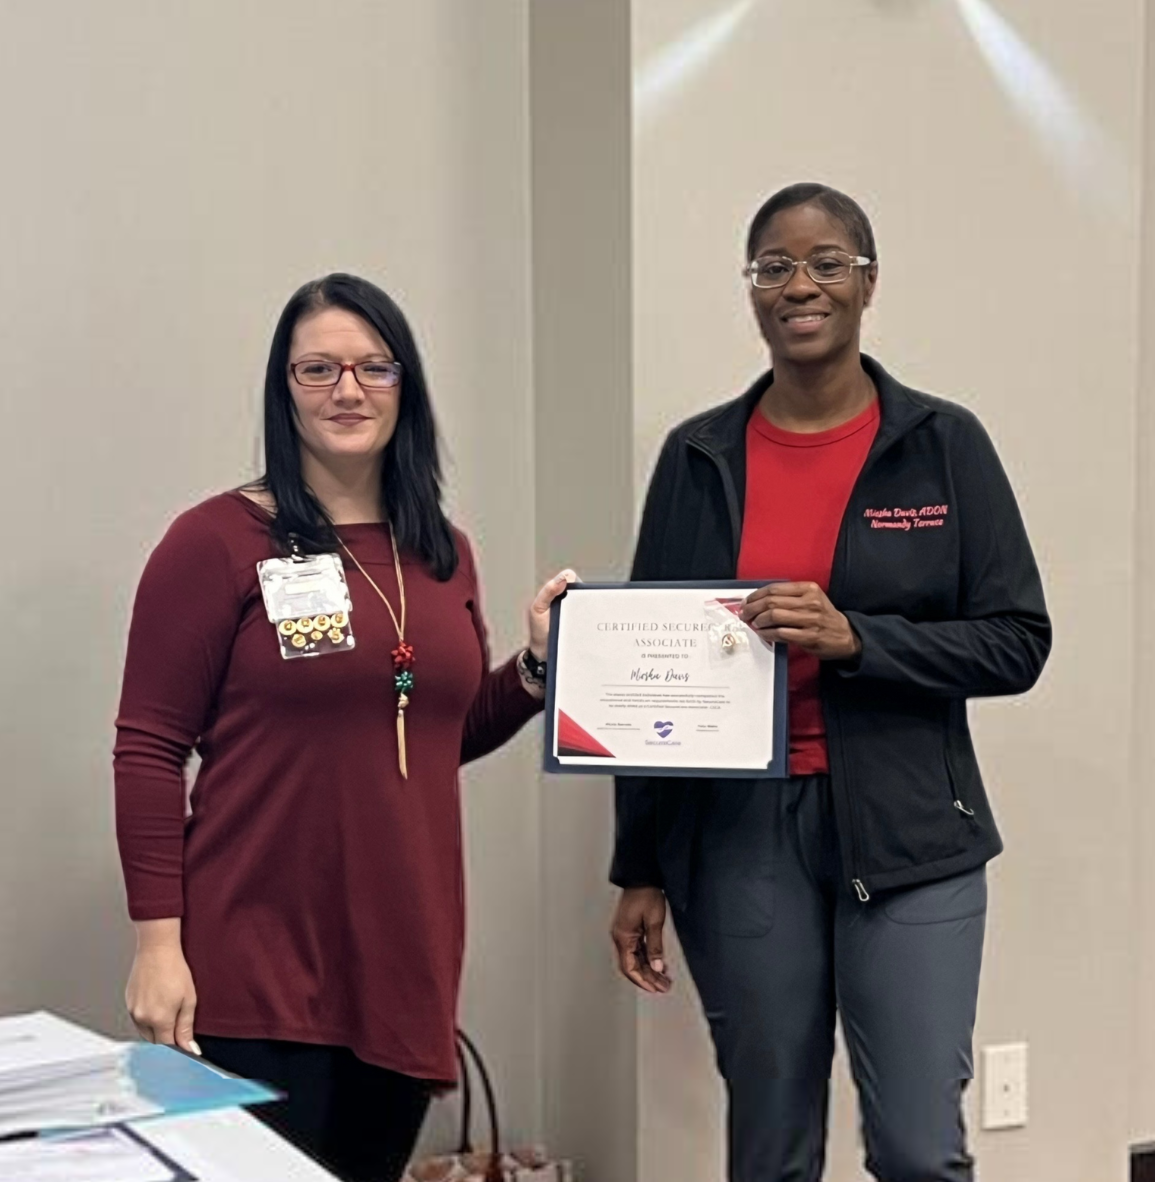 Miesha Davis receives her Associate and Care Partner level certifications, making her the first facility level employee to do so.